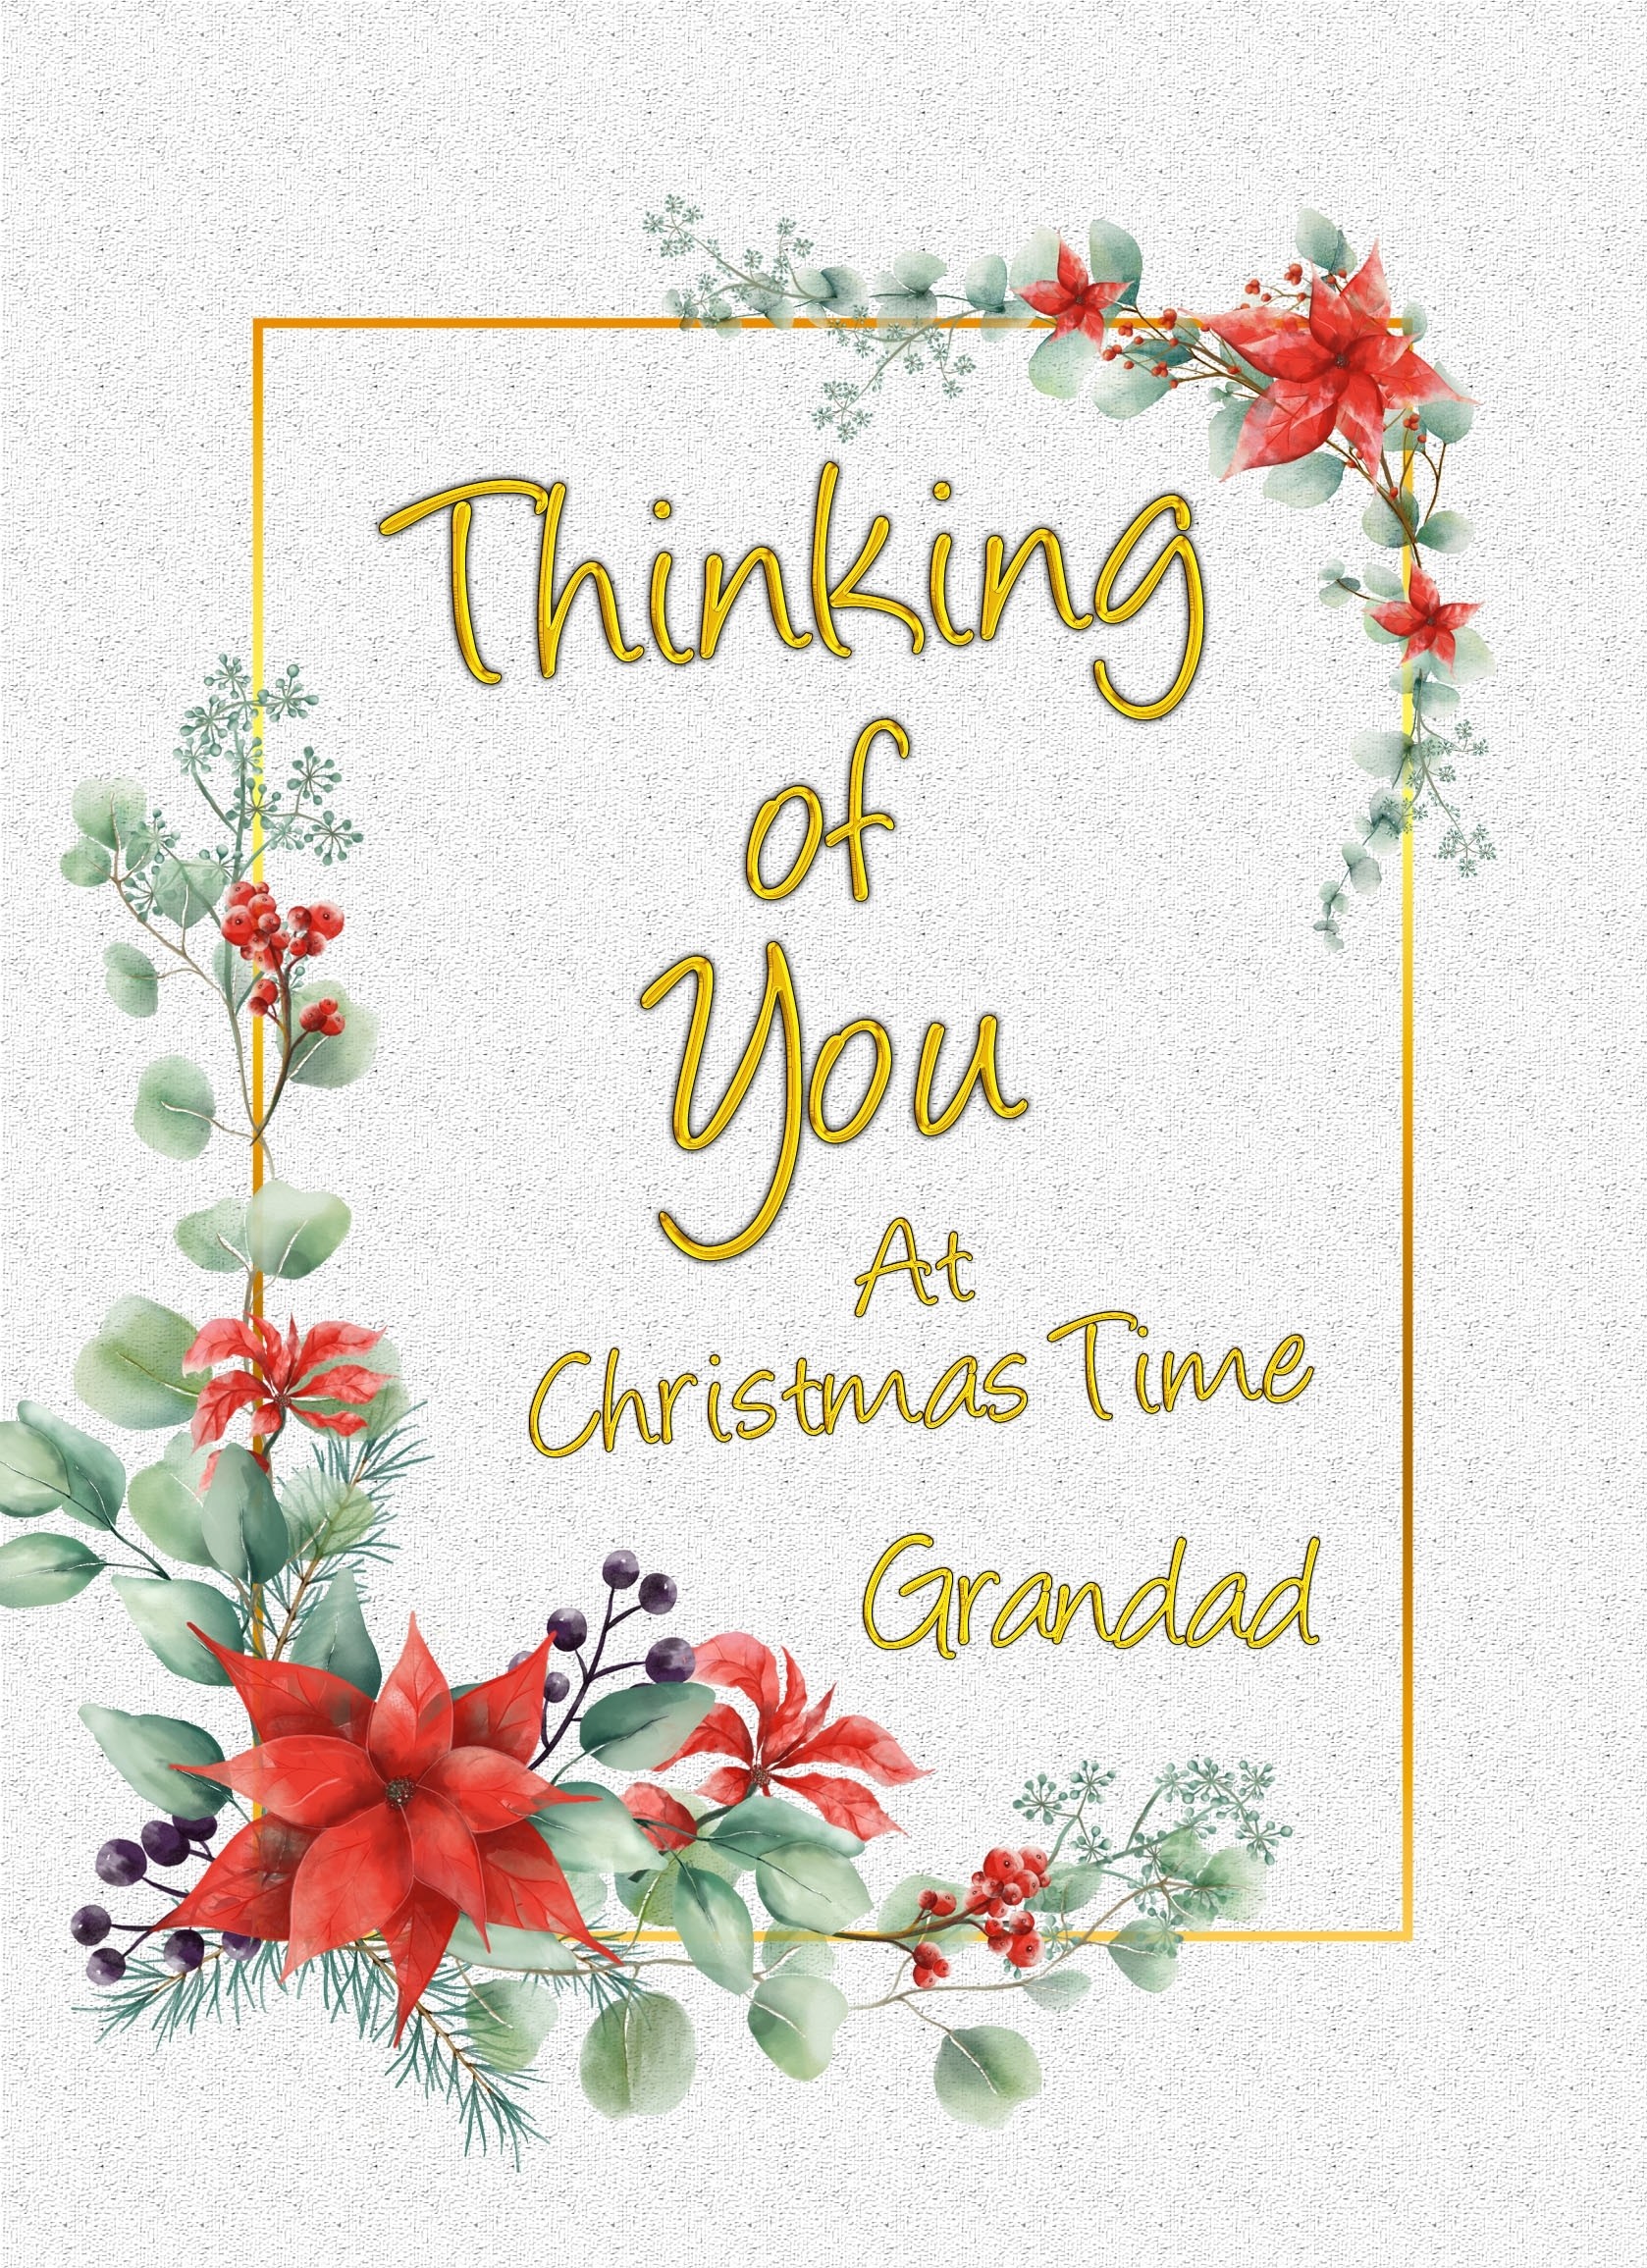 Thinking of You at Christmas Card For Grandad